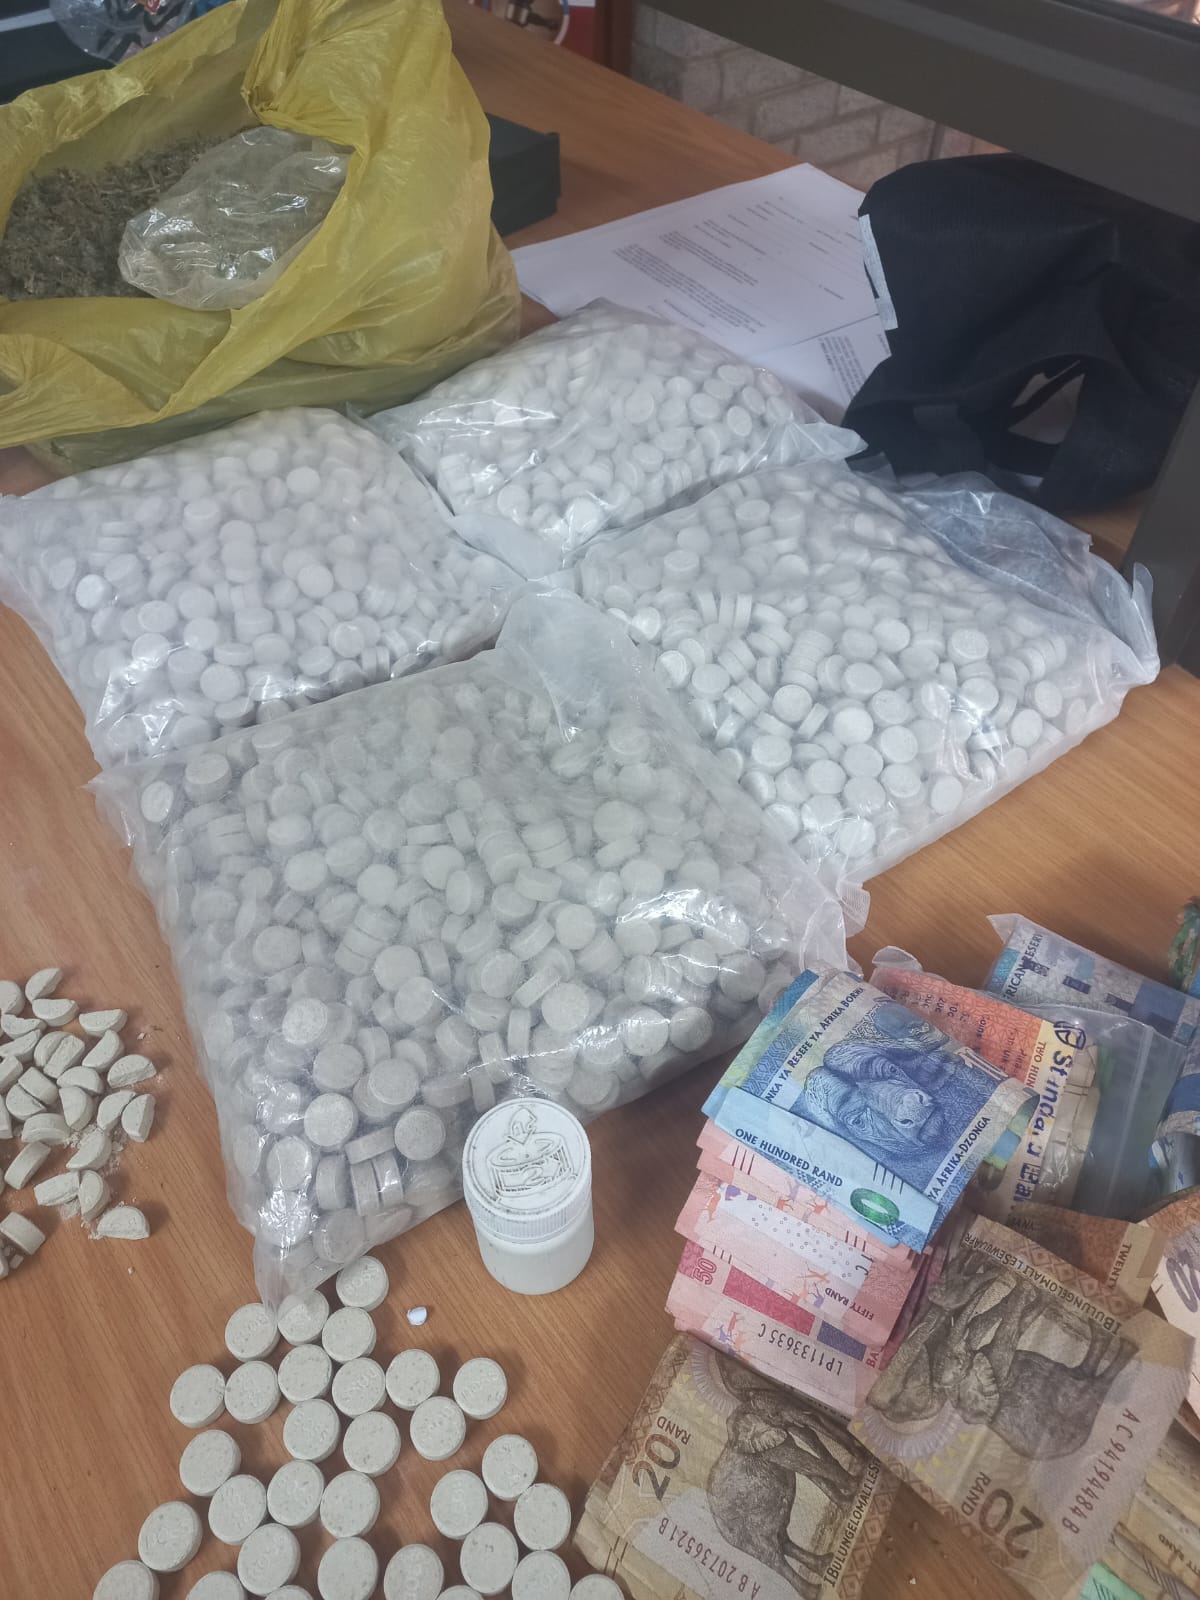 The SAPS confiscated a large quantity of drugs at a house in Prince Albert in the Central Karoo